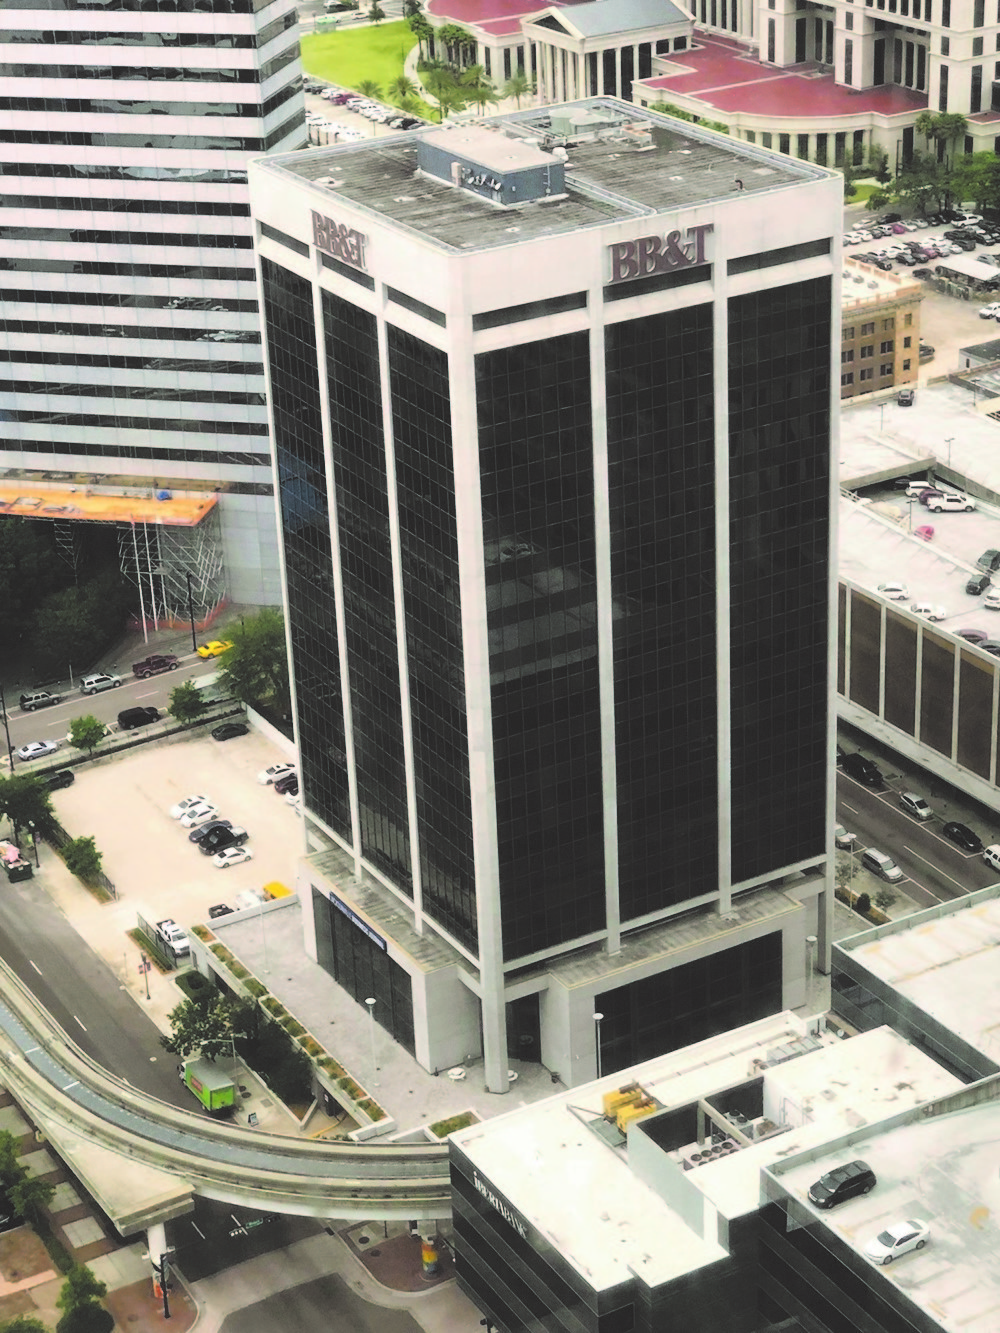 Ash Properties paid almost $25.5 million for the BB&T Tower at 200 W. Forsyth St. and the parking garage on Julia Street in July 2018.